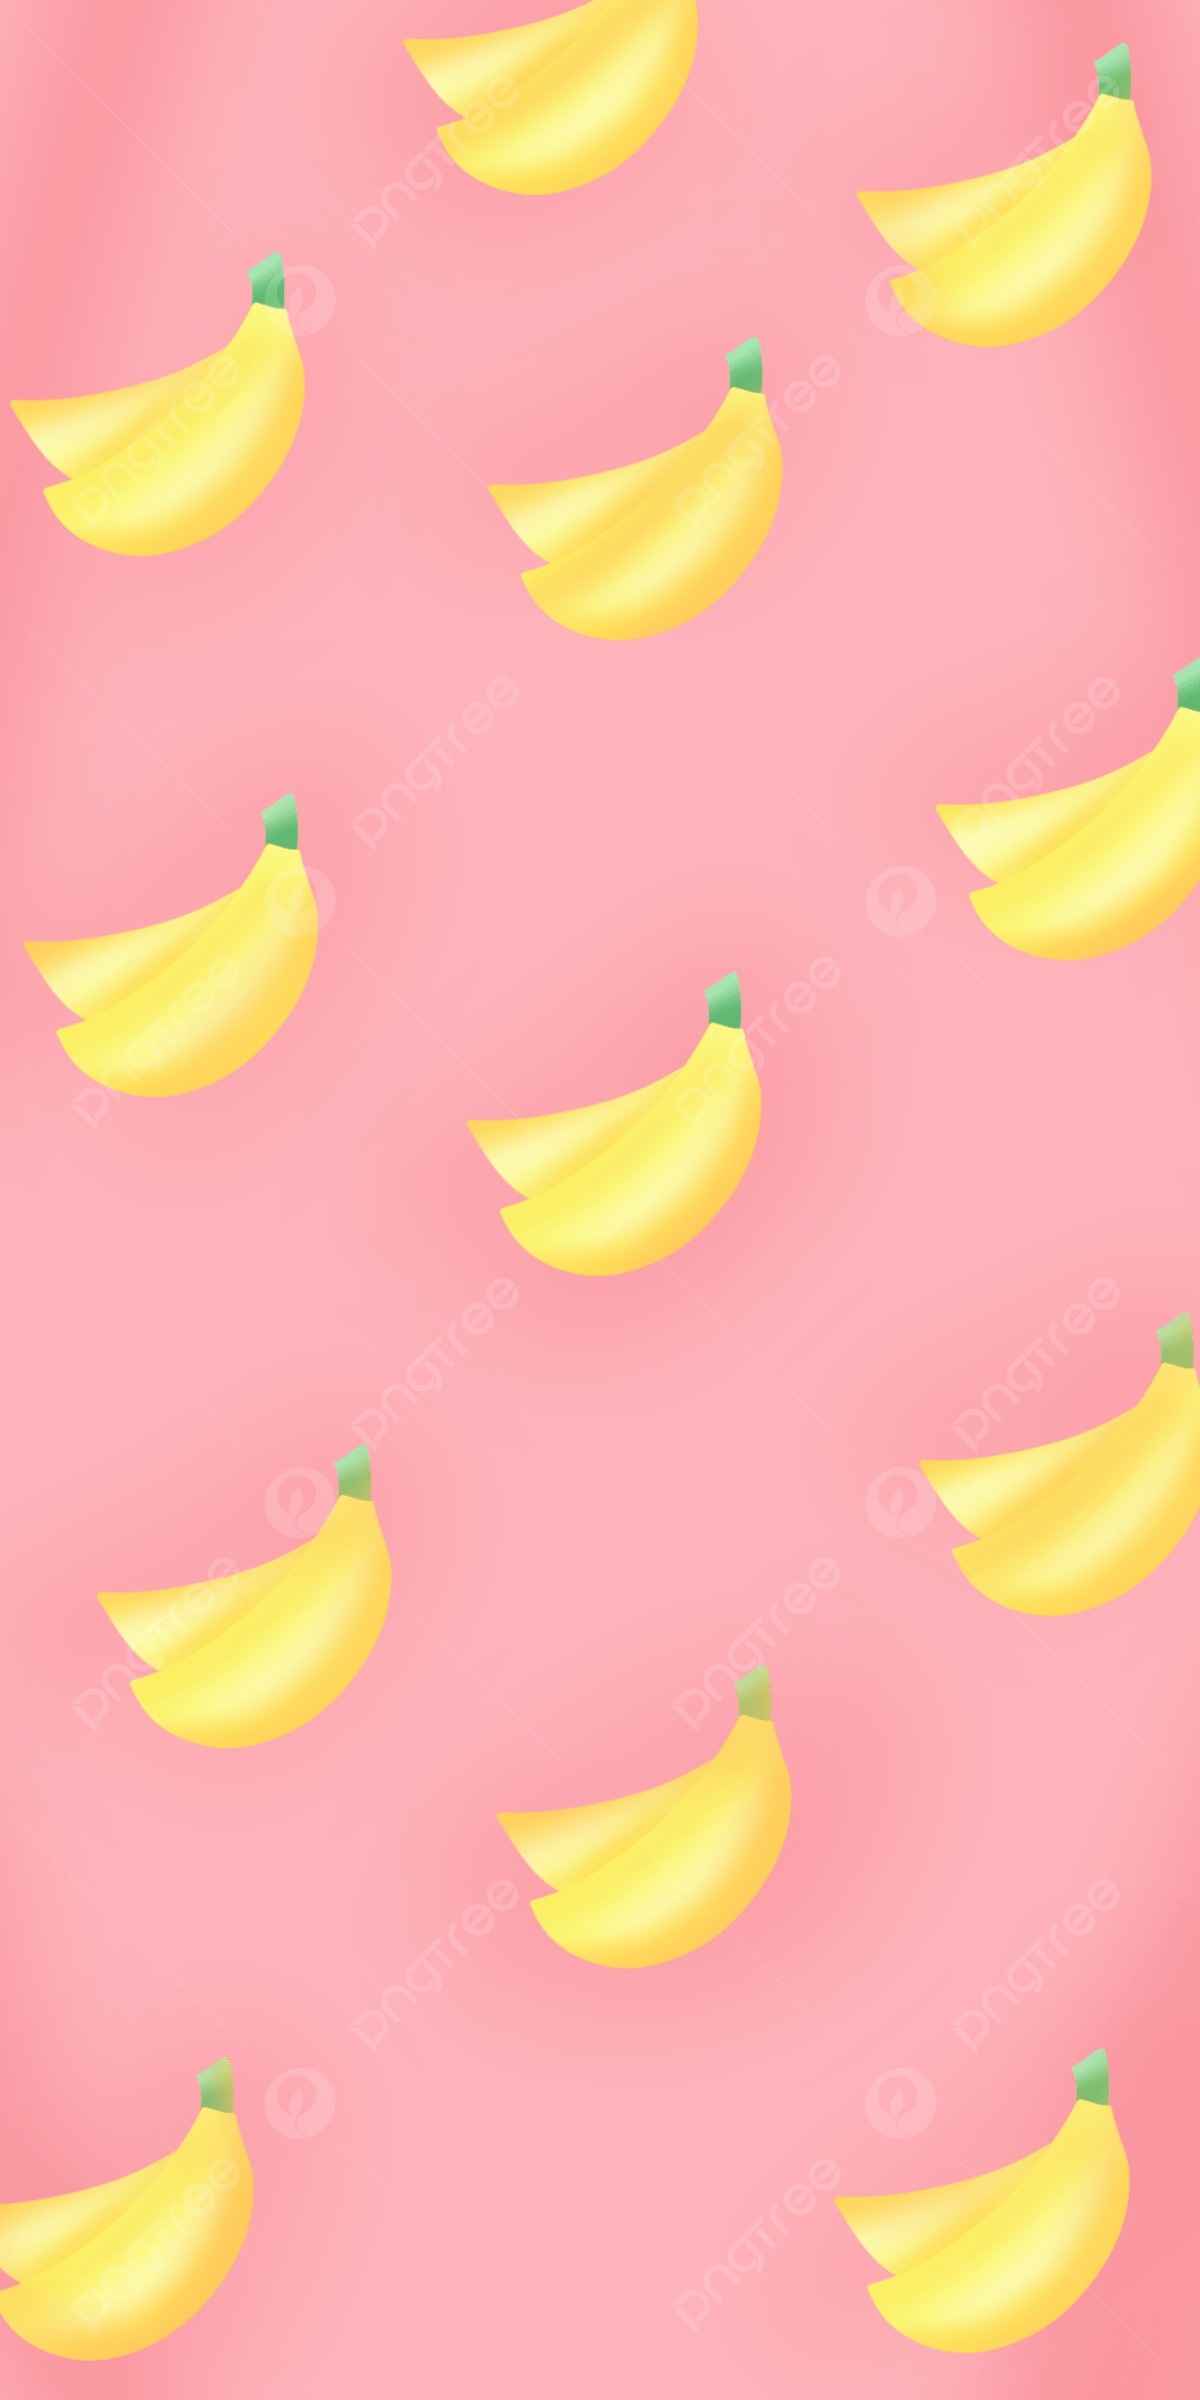 A pink background with a pattern of yellow bananas - Banana